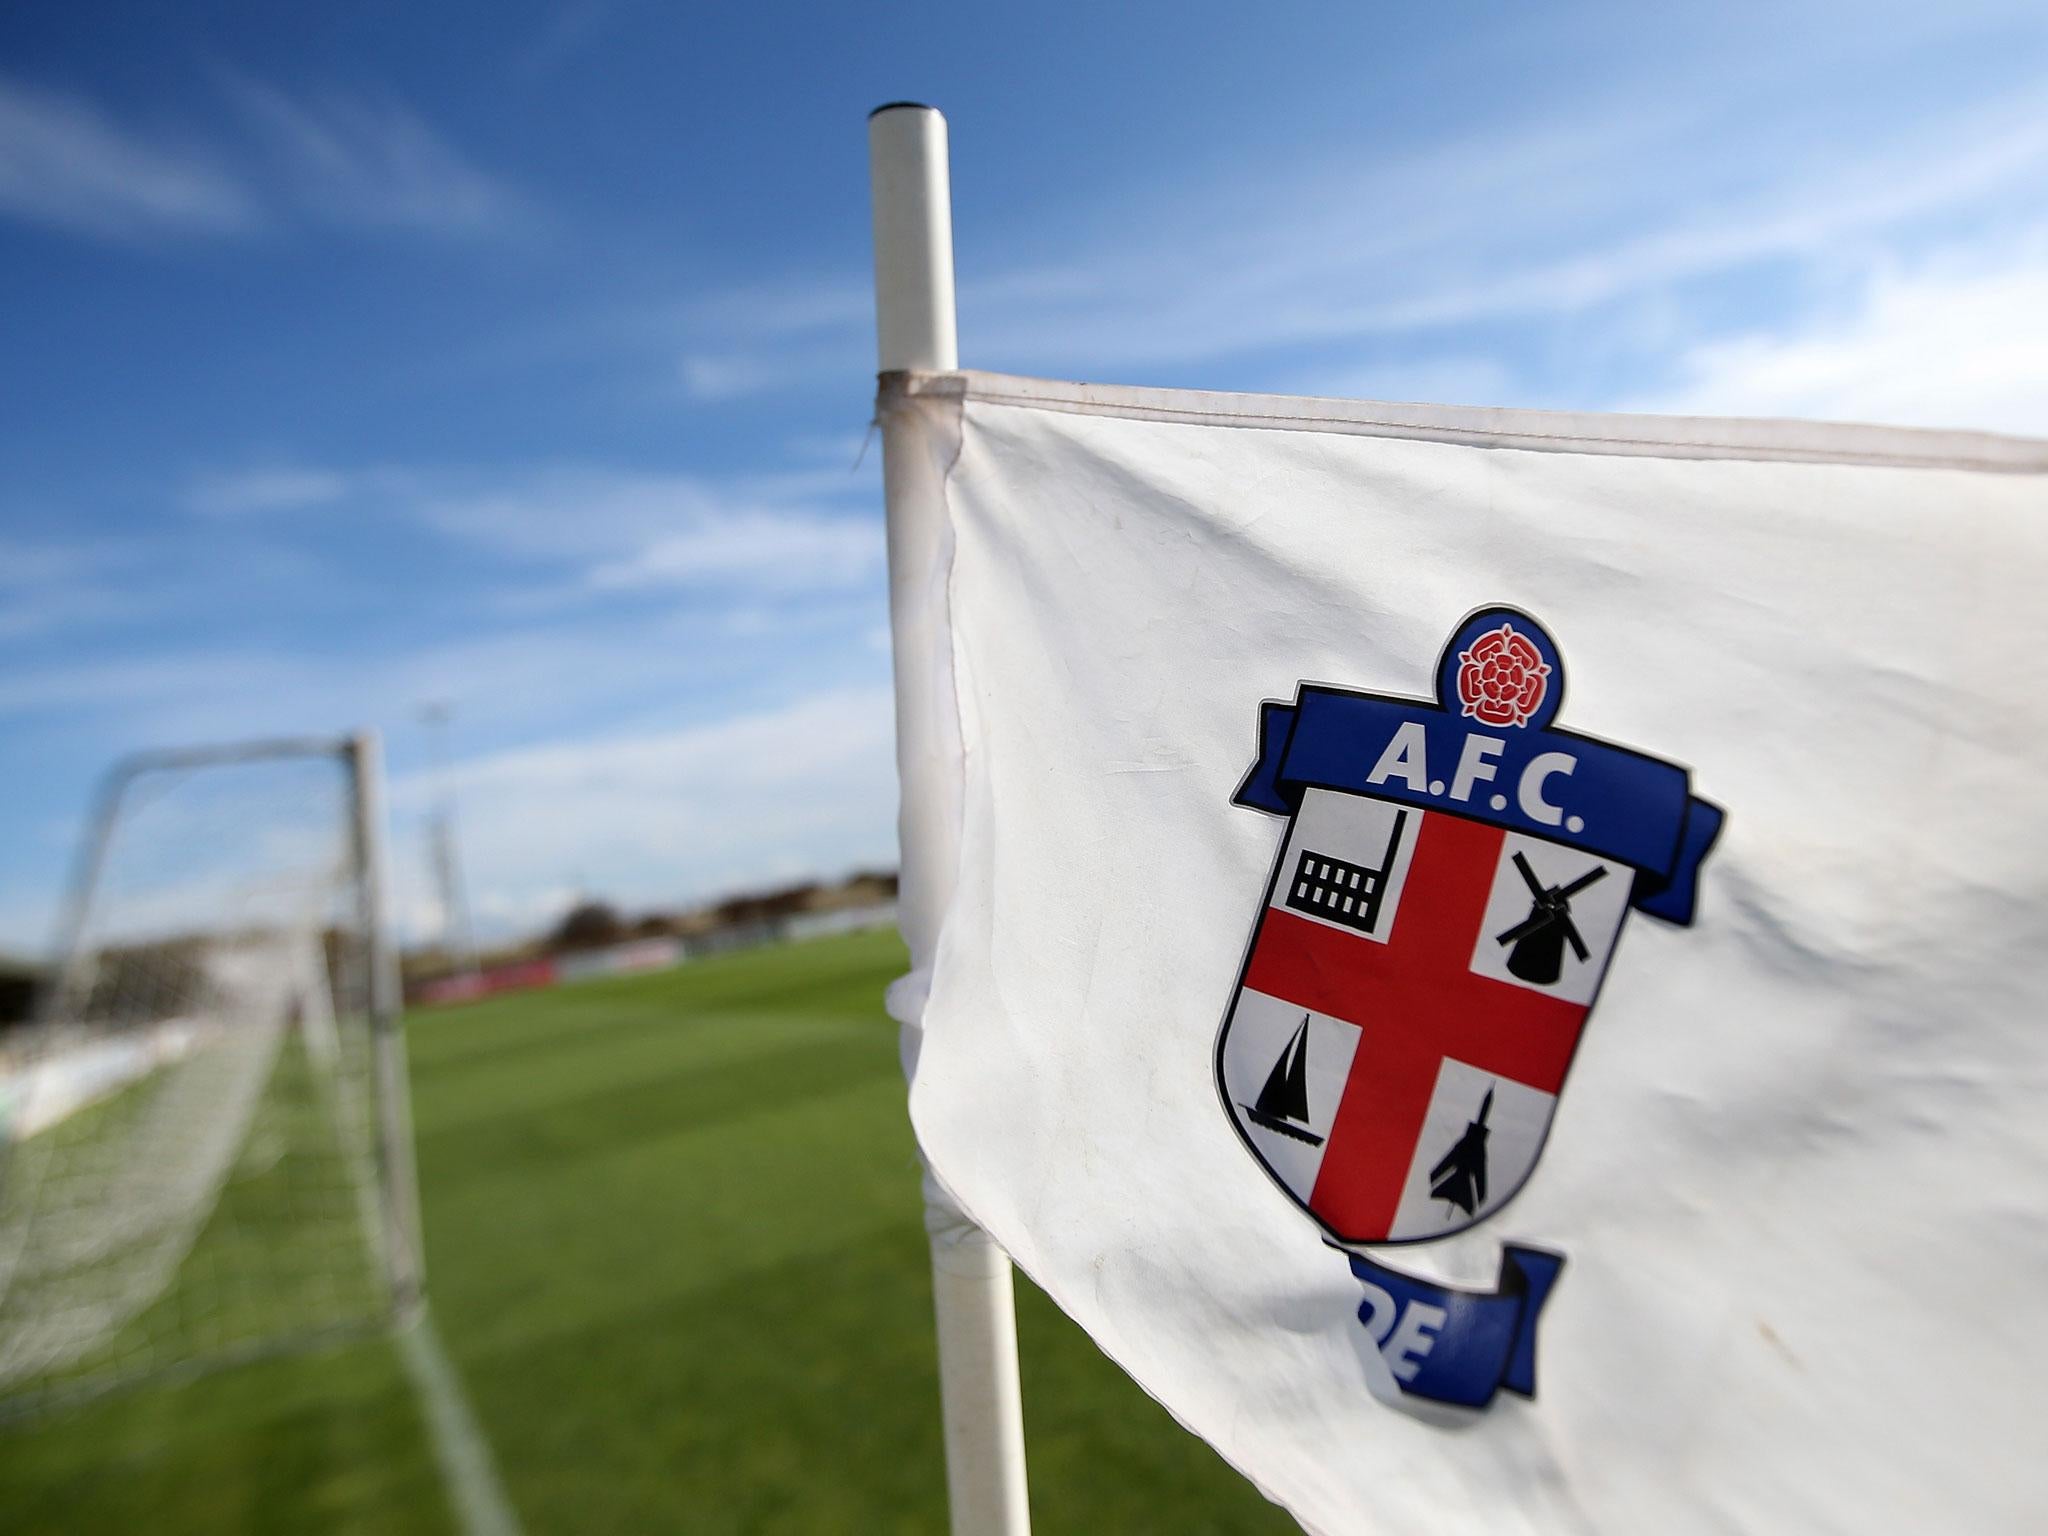 AFC Fylde have risen from the 11-th tier West Lancashire League to the brink of the Football League